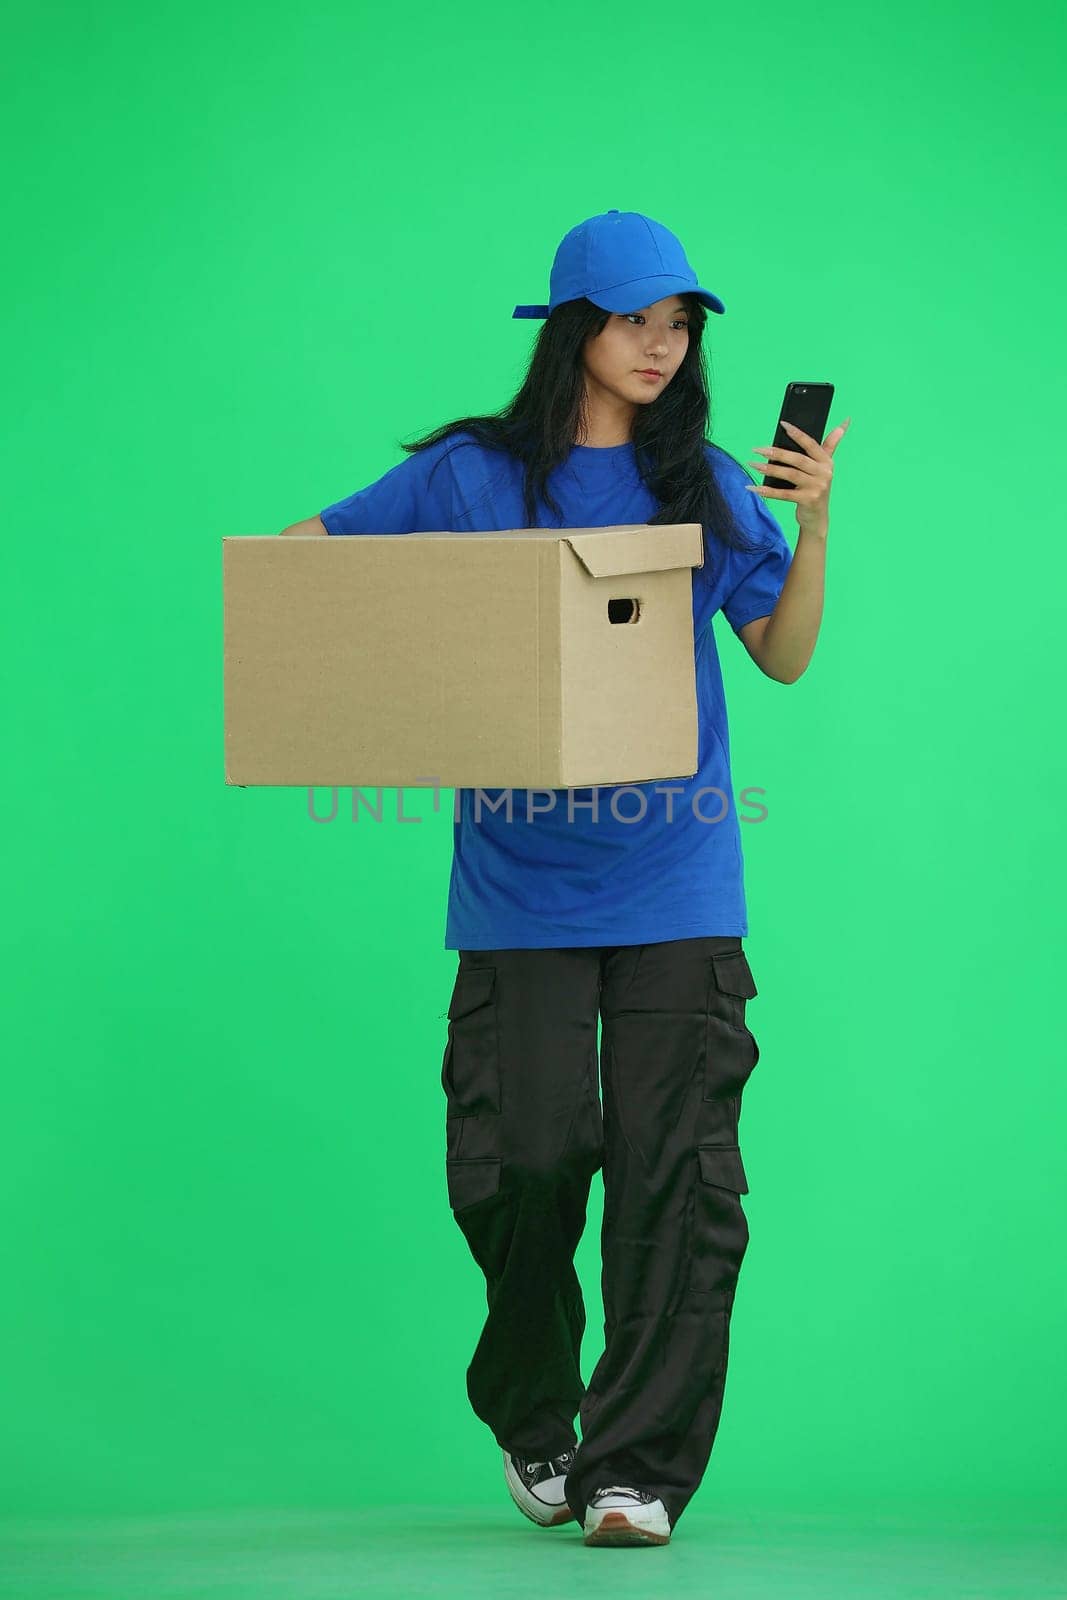 Delivery girl, on a green background, full-length, with a box and a phone.